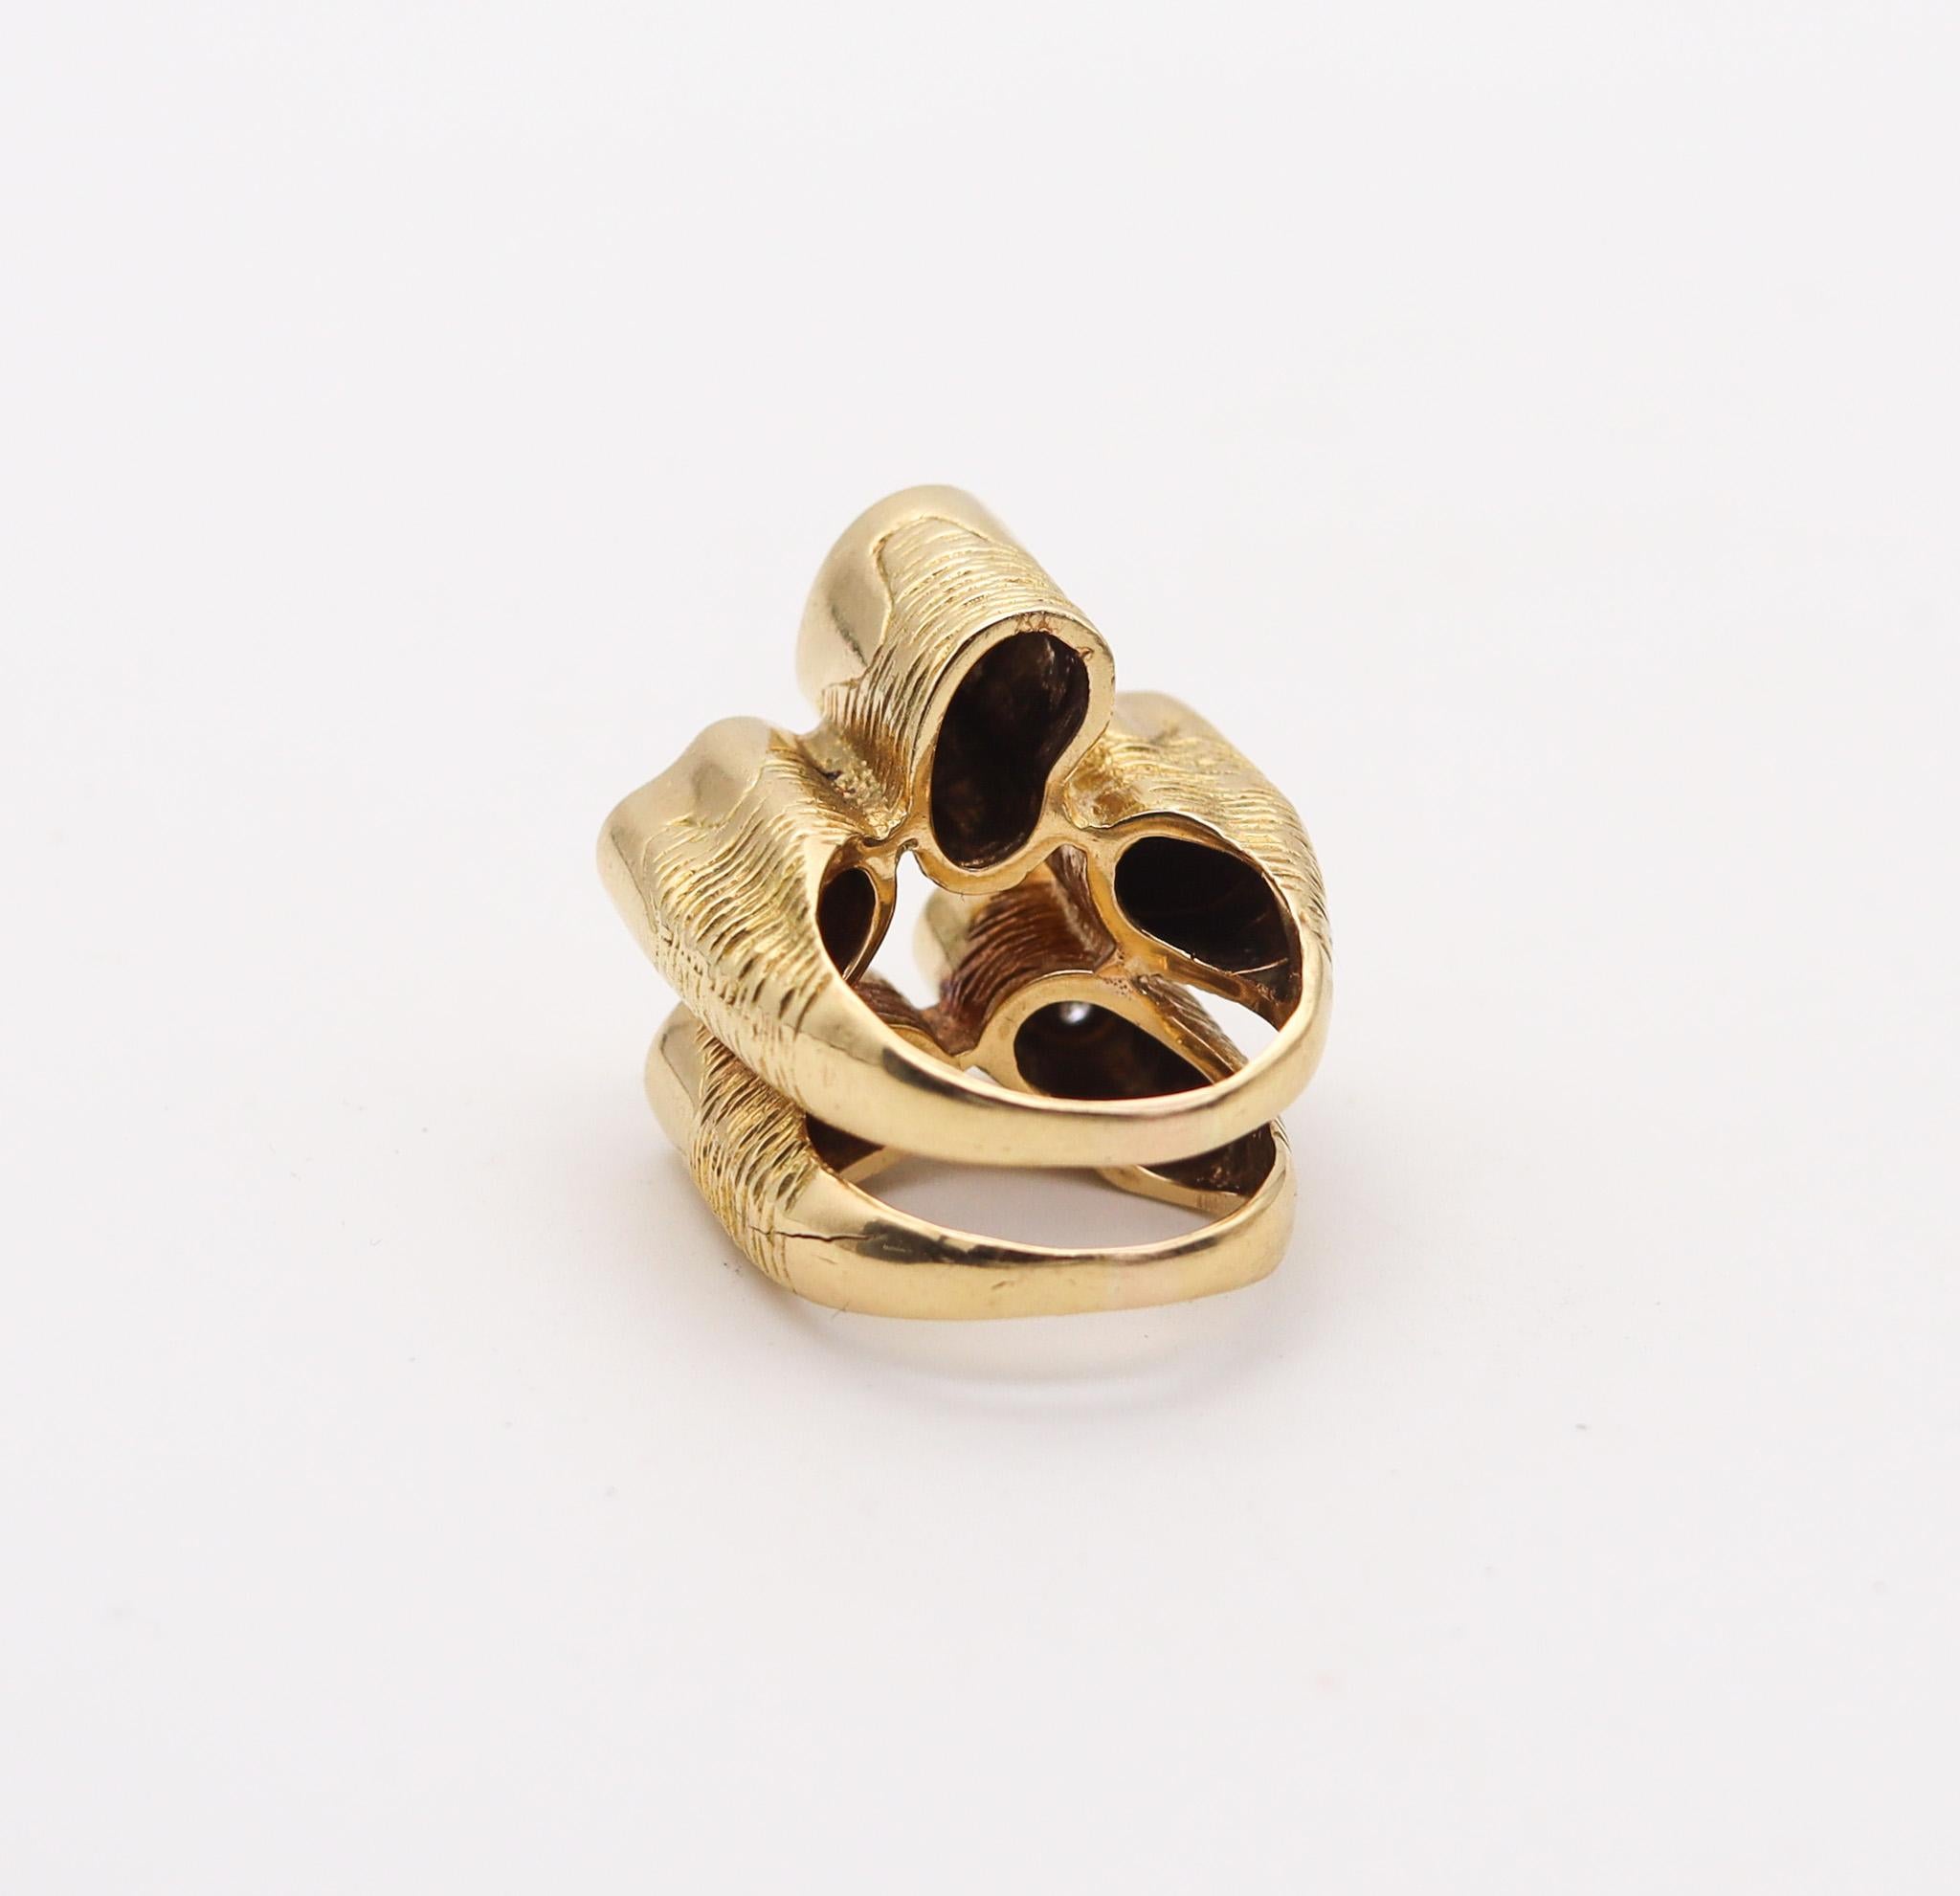 Italian Modernist 1970 Concretism Sculptural Ring In 18Kt Yellow Gold & Diamonds 1